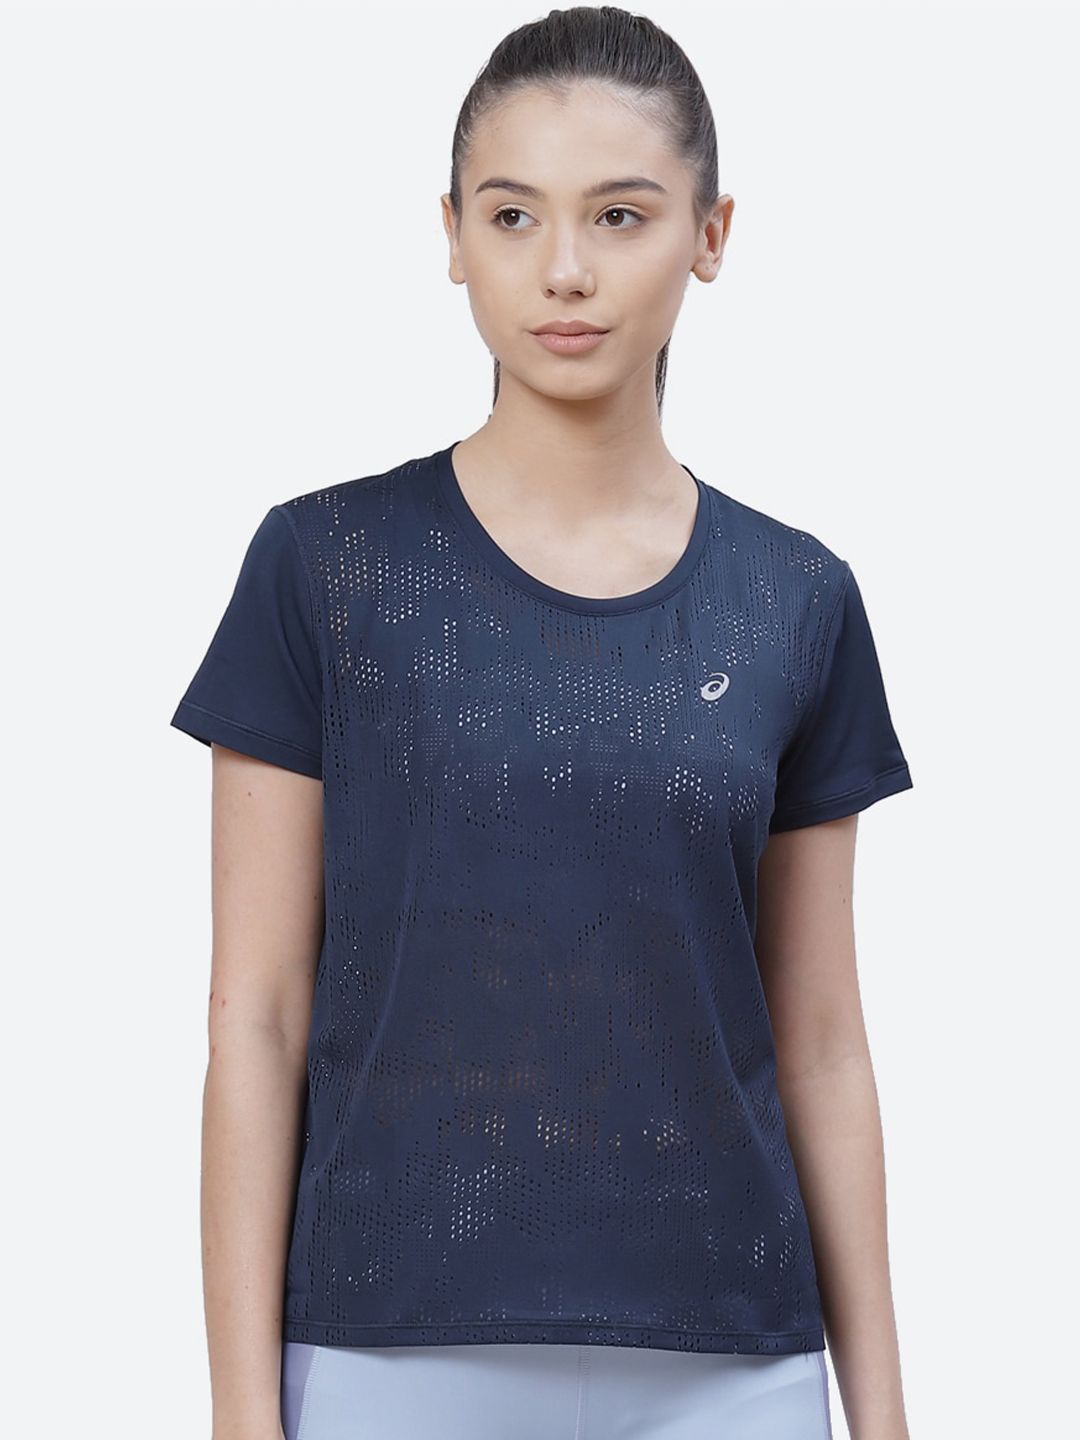 ASICS Women Blue Printed VENTILATE SS Running T-shirt Price in India